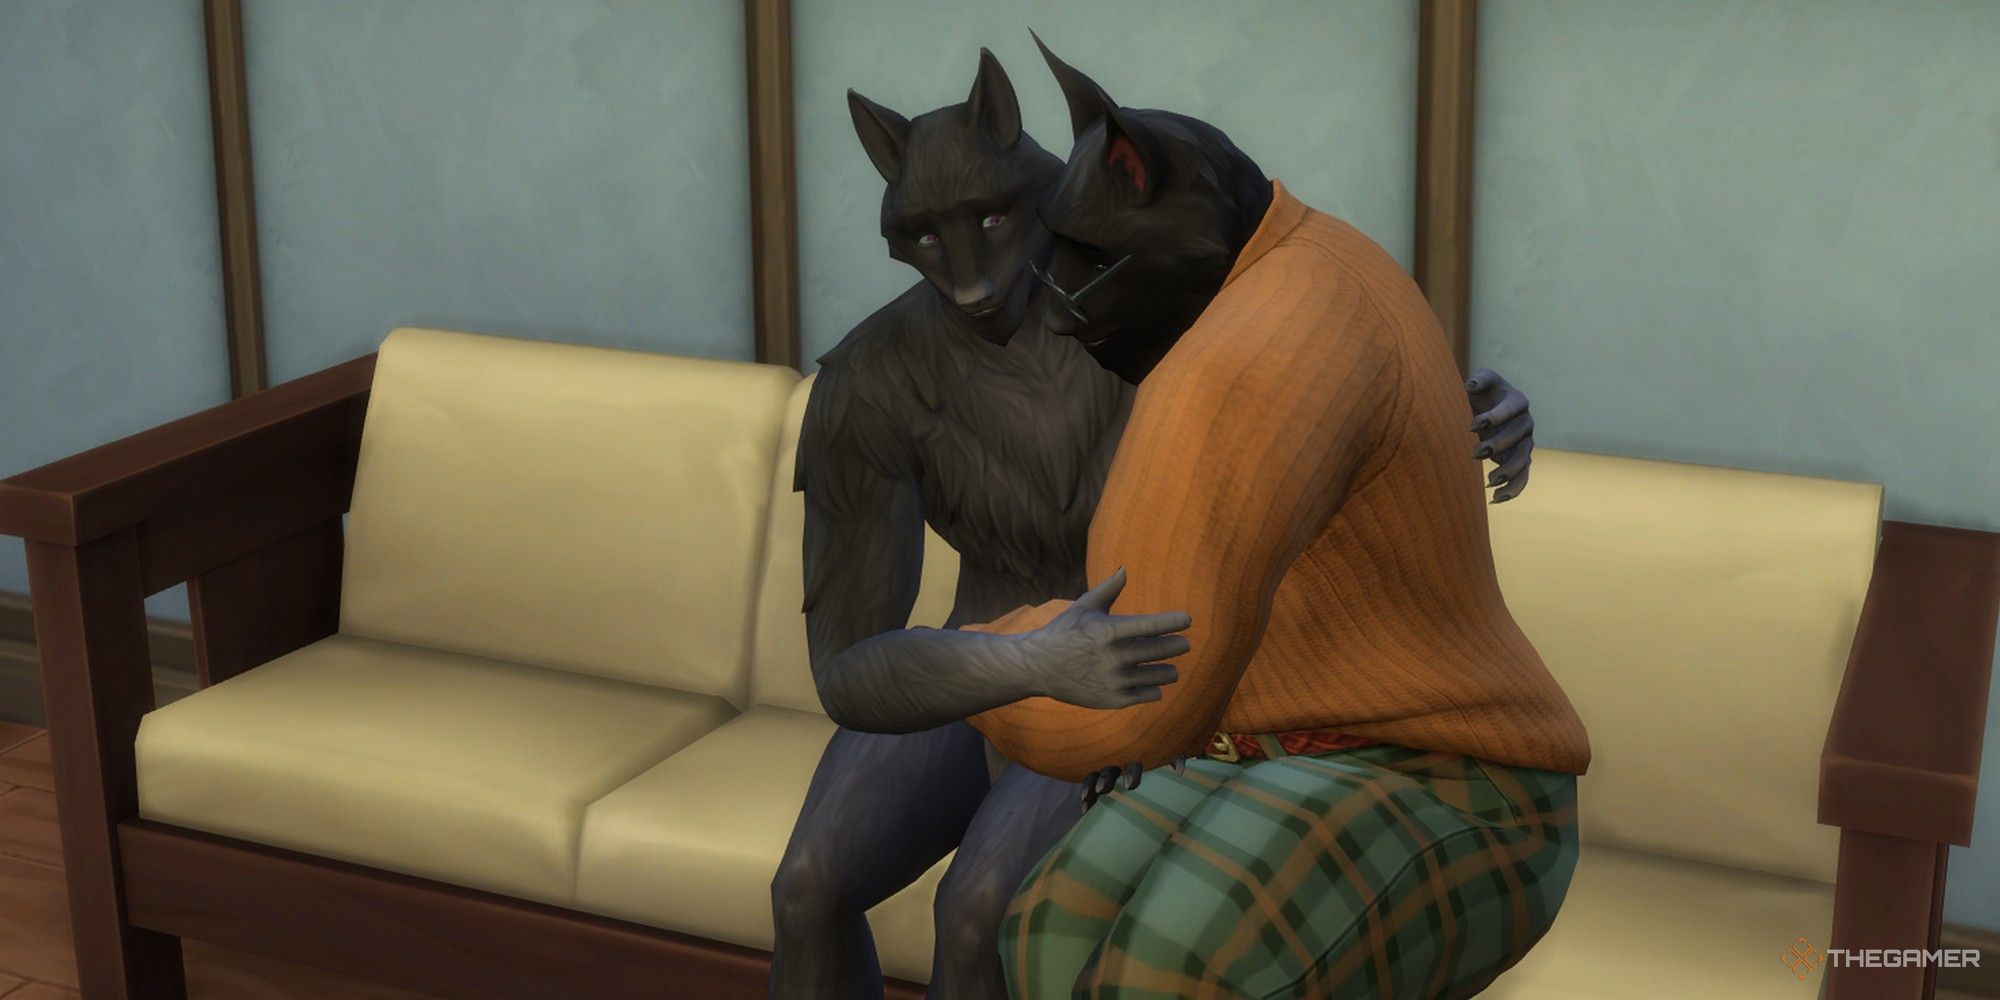 two werewolf fated mates on a date, snuggling on a couch in the sims 4 for our sims 4 fated mate werewolves guide-1